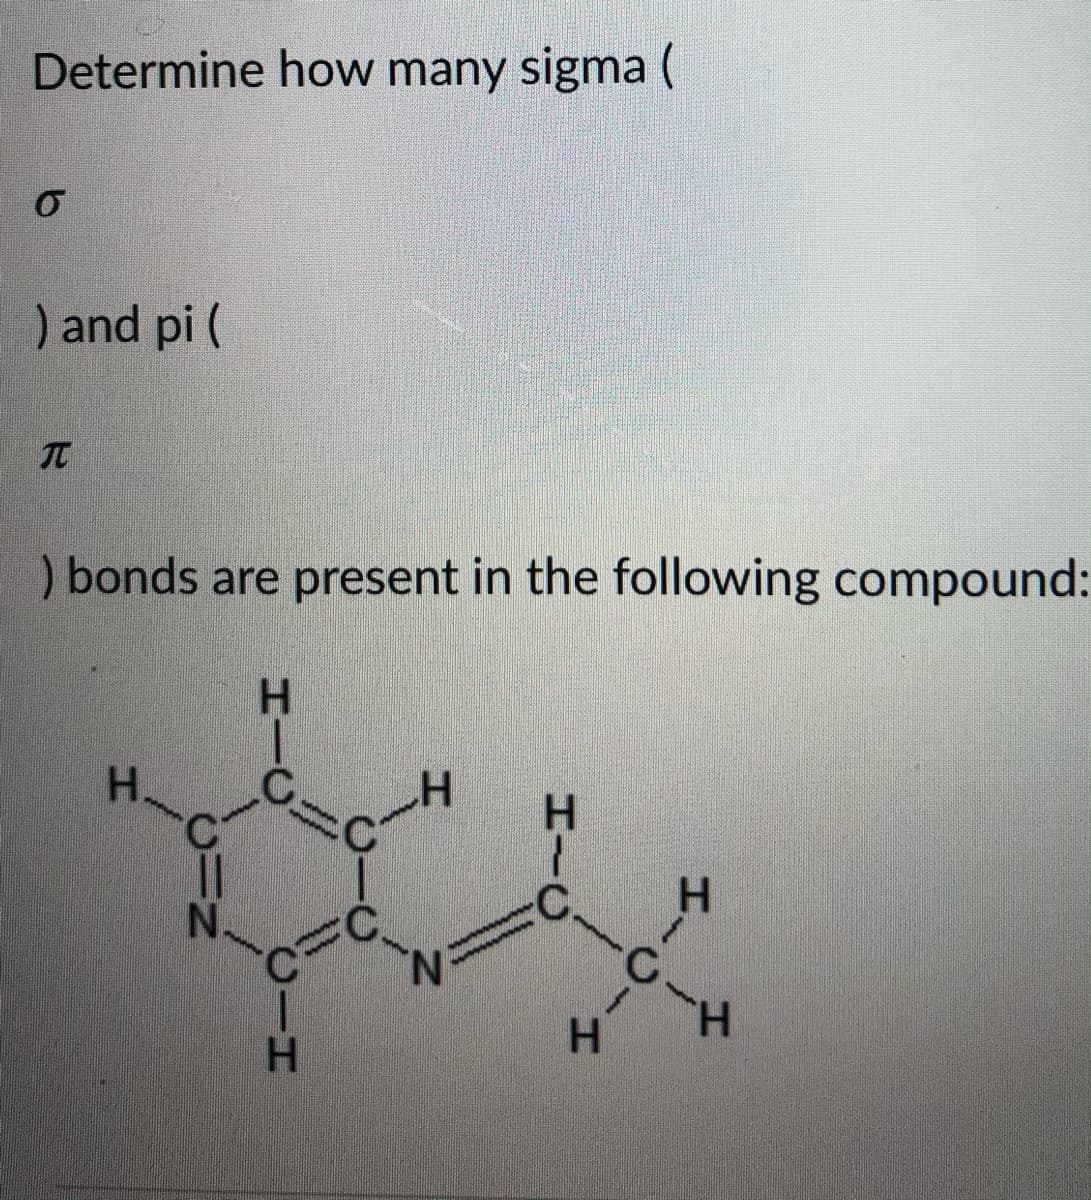 Determine how many sigma (
) and pi (
TC
) bonds are present in the following compound:
H.
.C.
H'
H.
:C.
C.
N.
H.
1.
HIC
HIC
